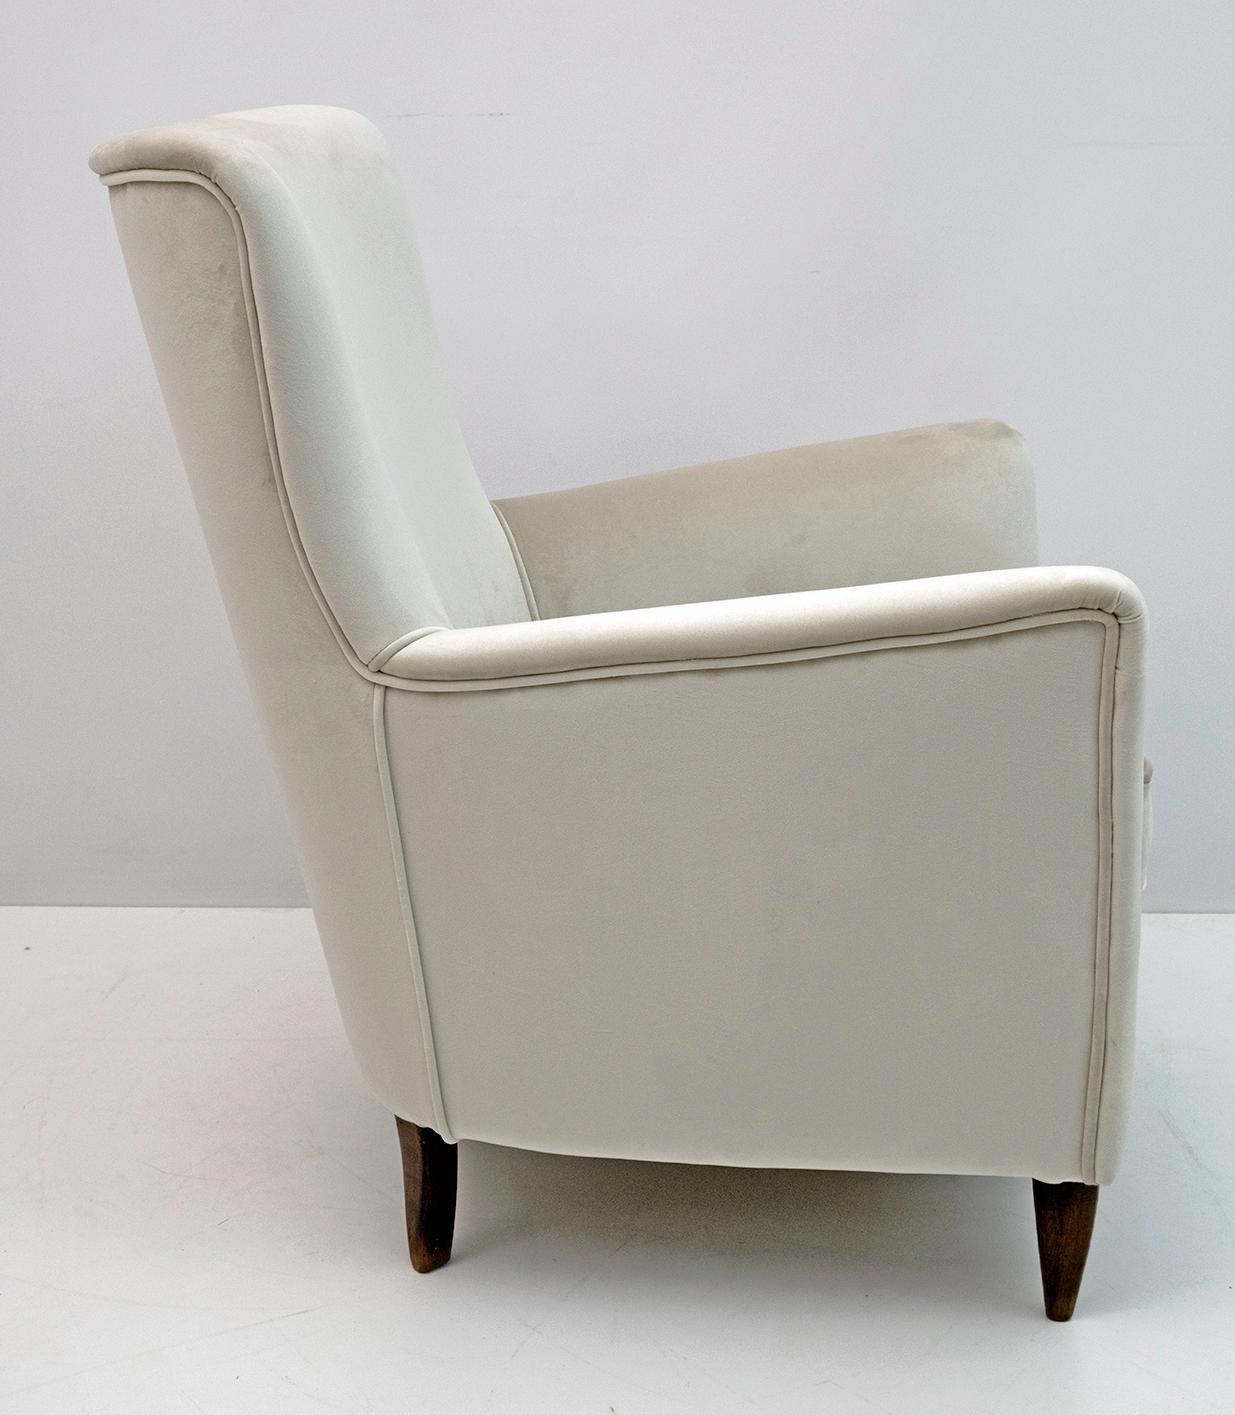 Attributed Gio Ponti Mid-Century Modern Italian Velvet Armchair for Isa, 1950s In Good Condition For Sale In Puglia, Puglia